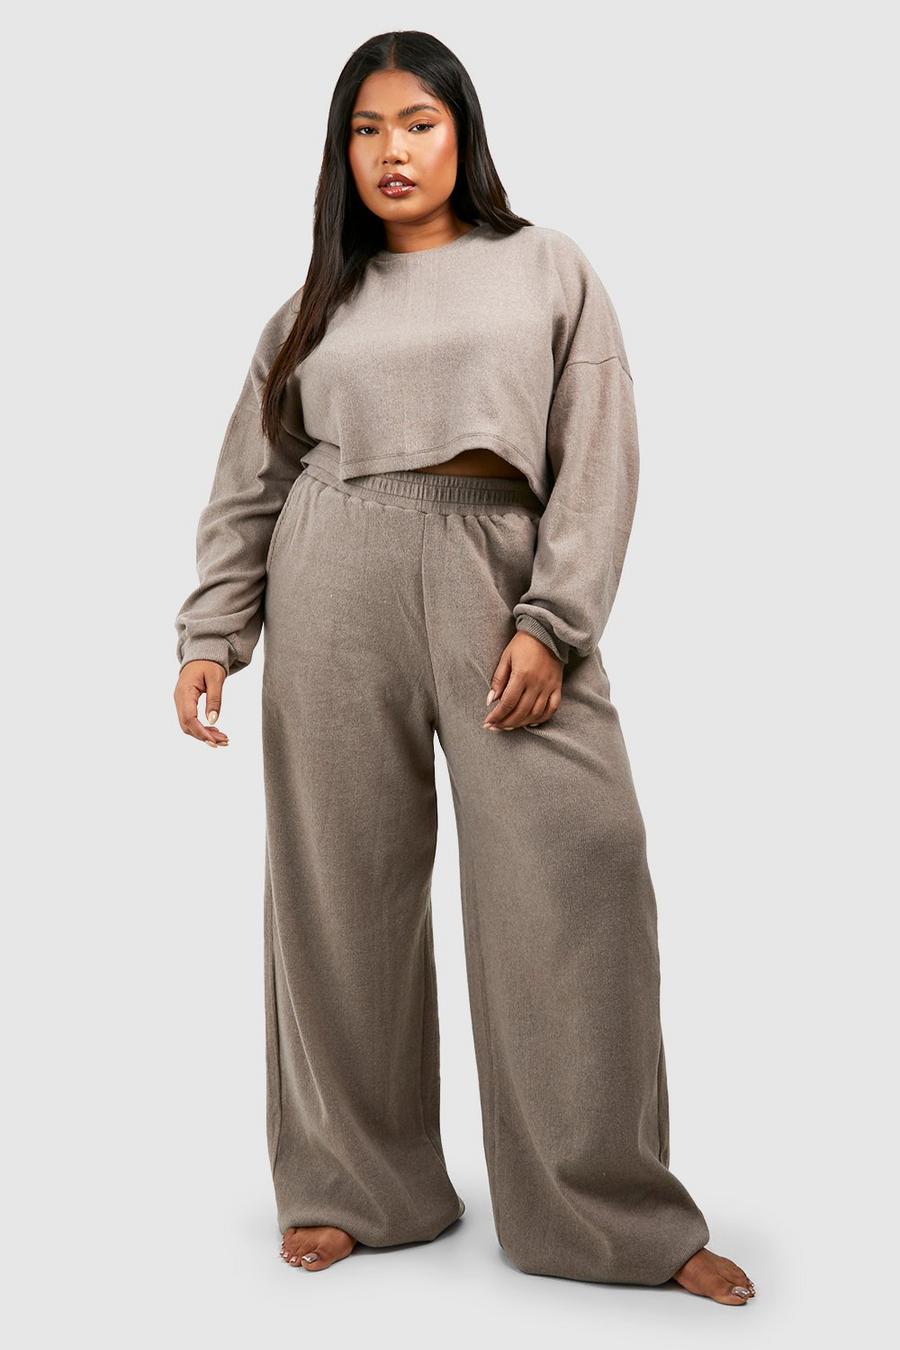 Taupe Jet set with confidence with this pair of ® Spotless Traveler Pants And Boxy Crop Set